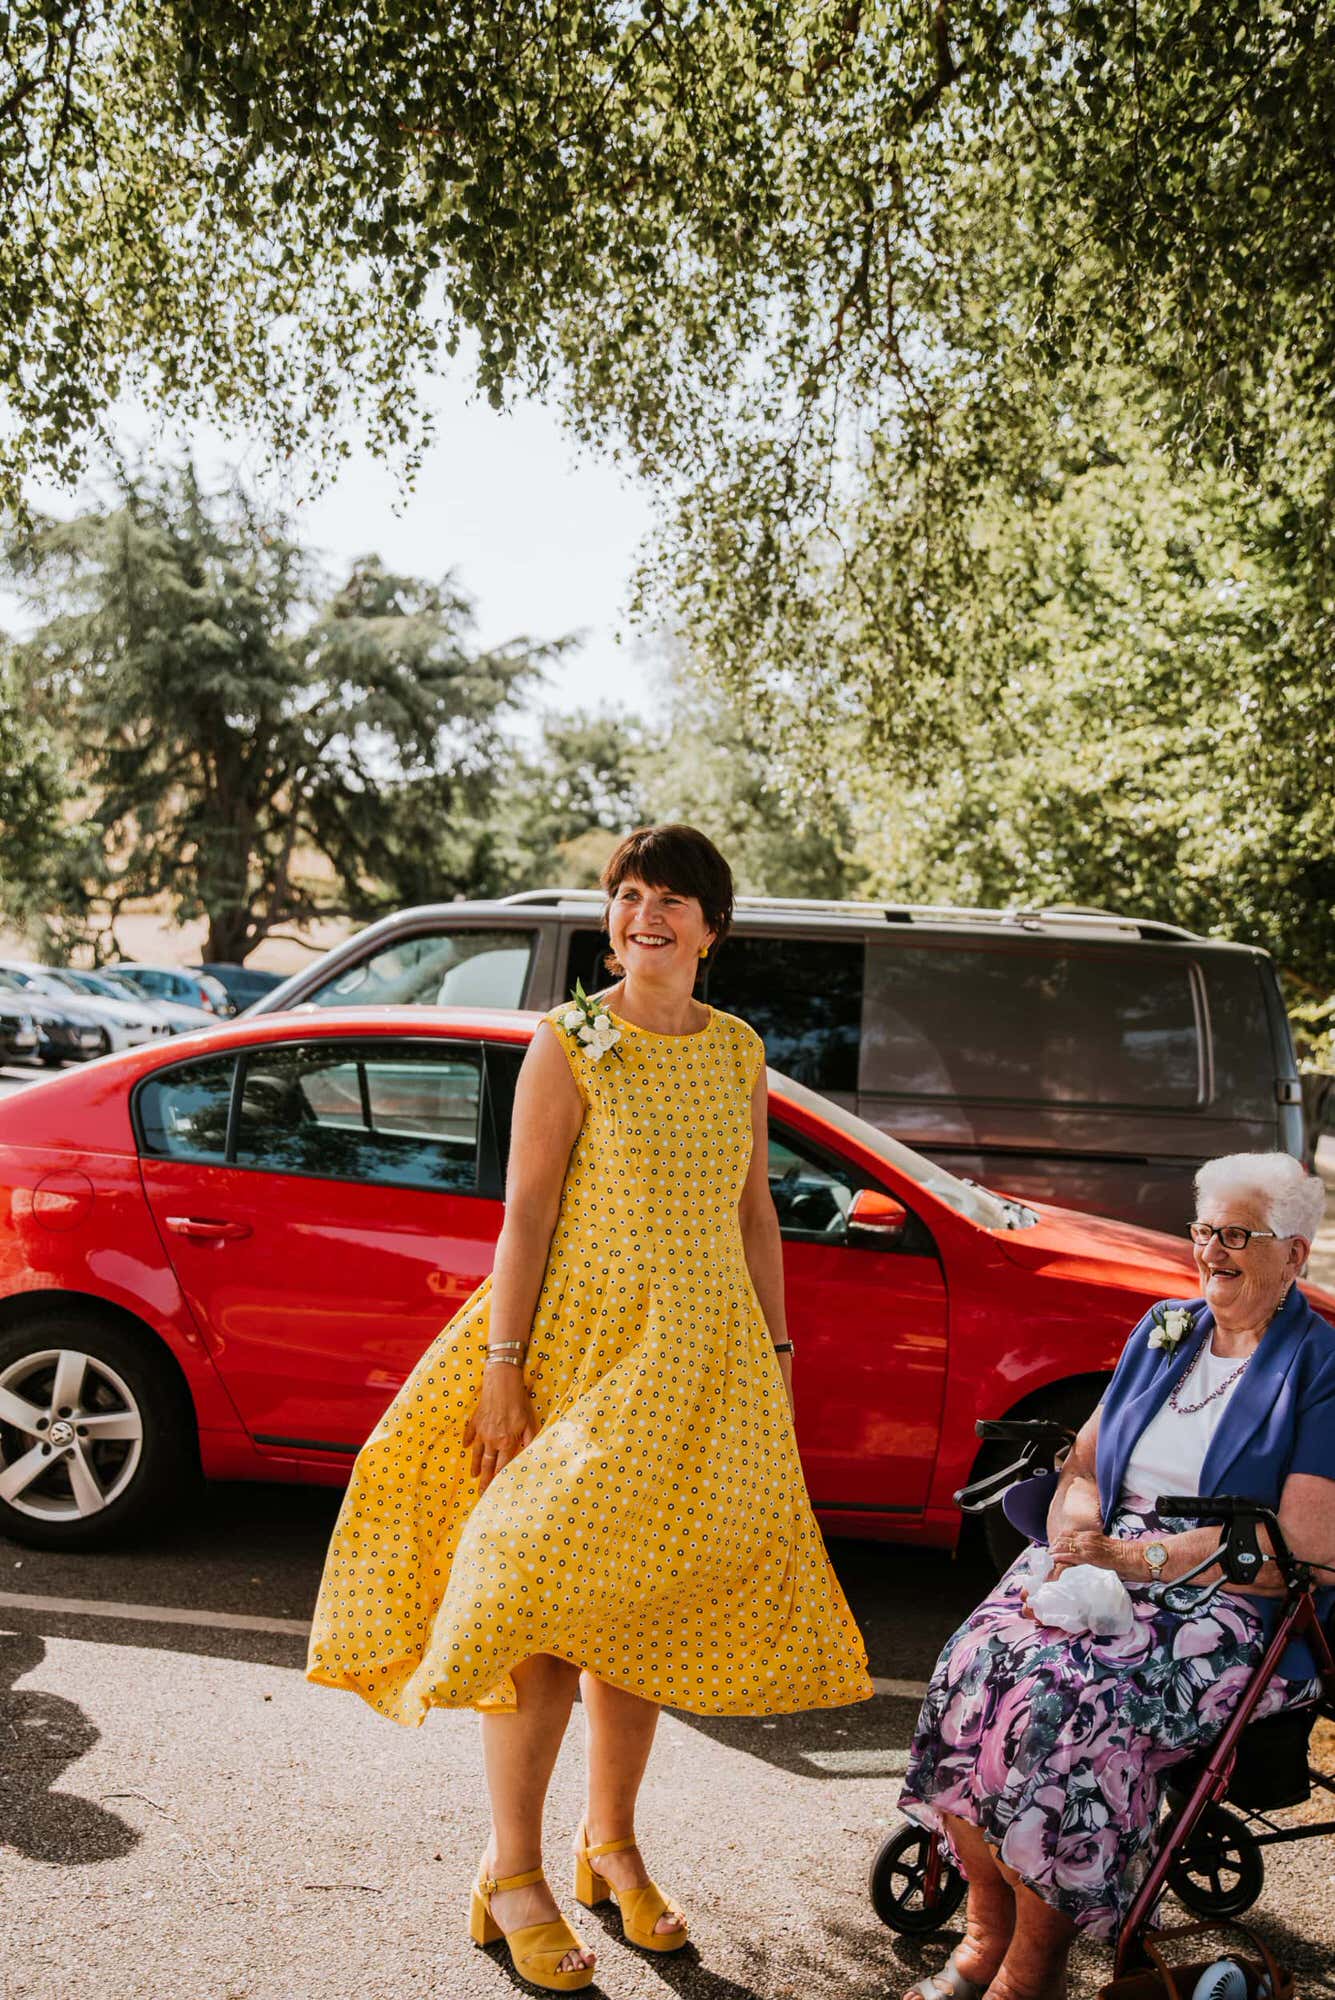 Lady in yellow dress, grandma in seated chair smiling